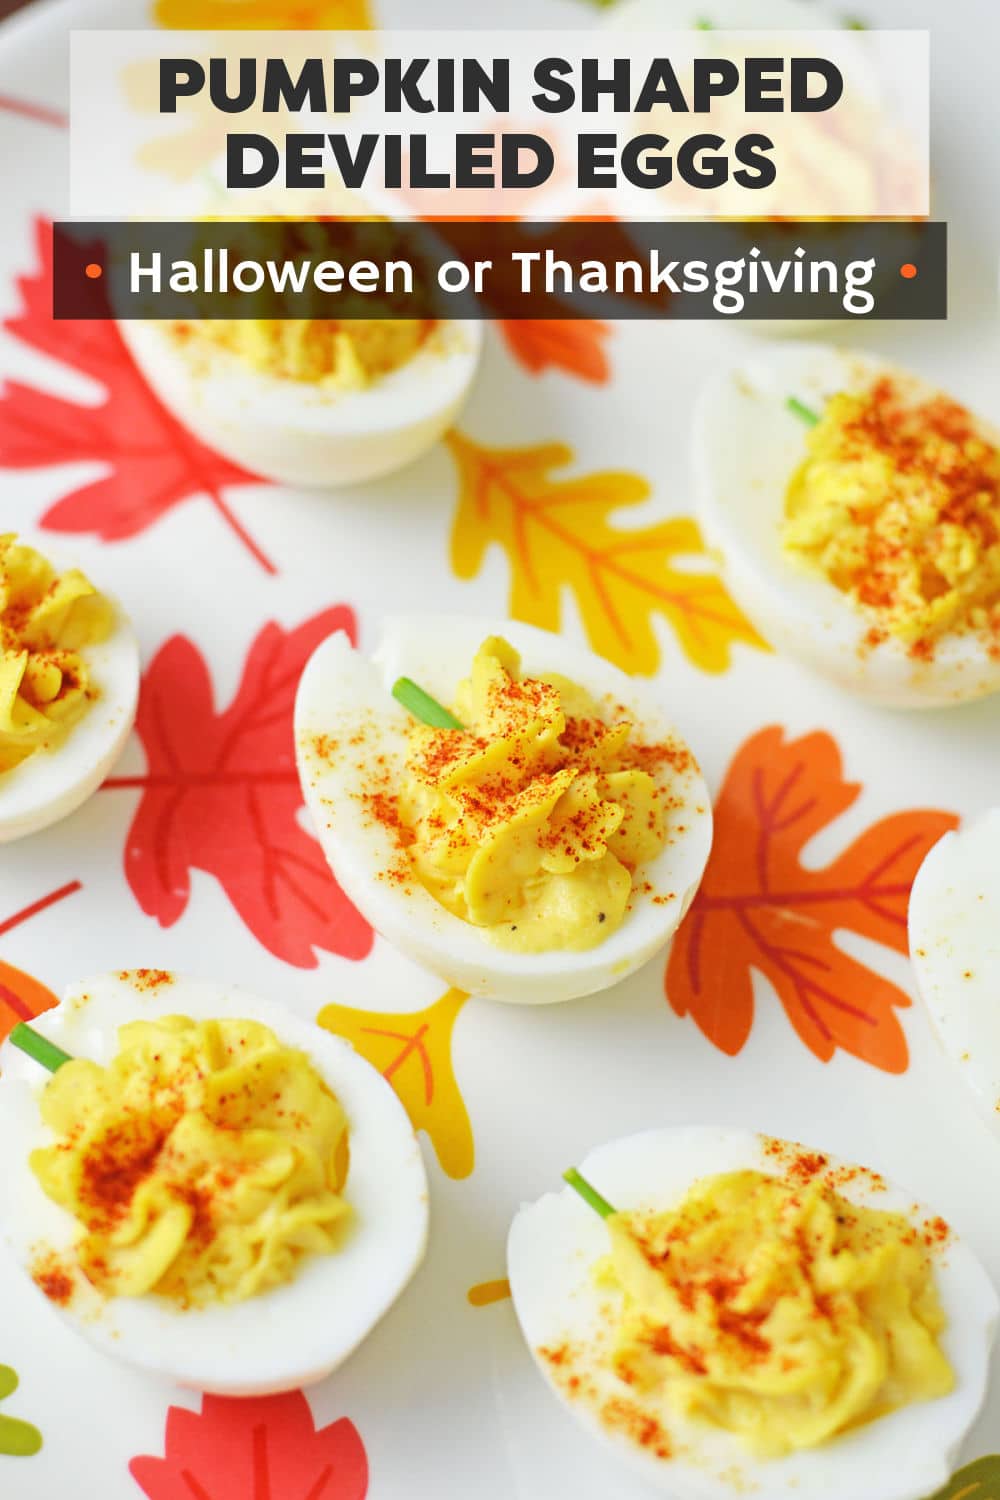 A fun fall take on classic deviled eggs, these easy Pumpkin Deviled Eggs are the perfect appetizer for Halloween, Thanksgiving, or any fall gathering.